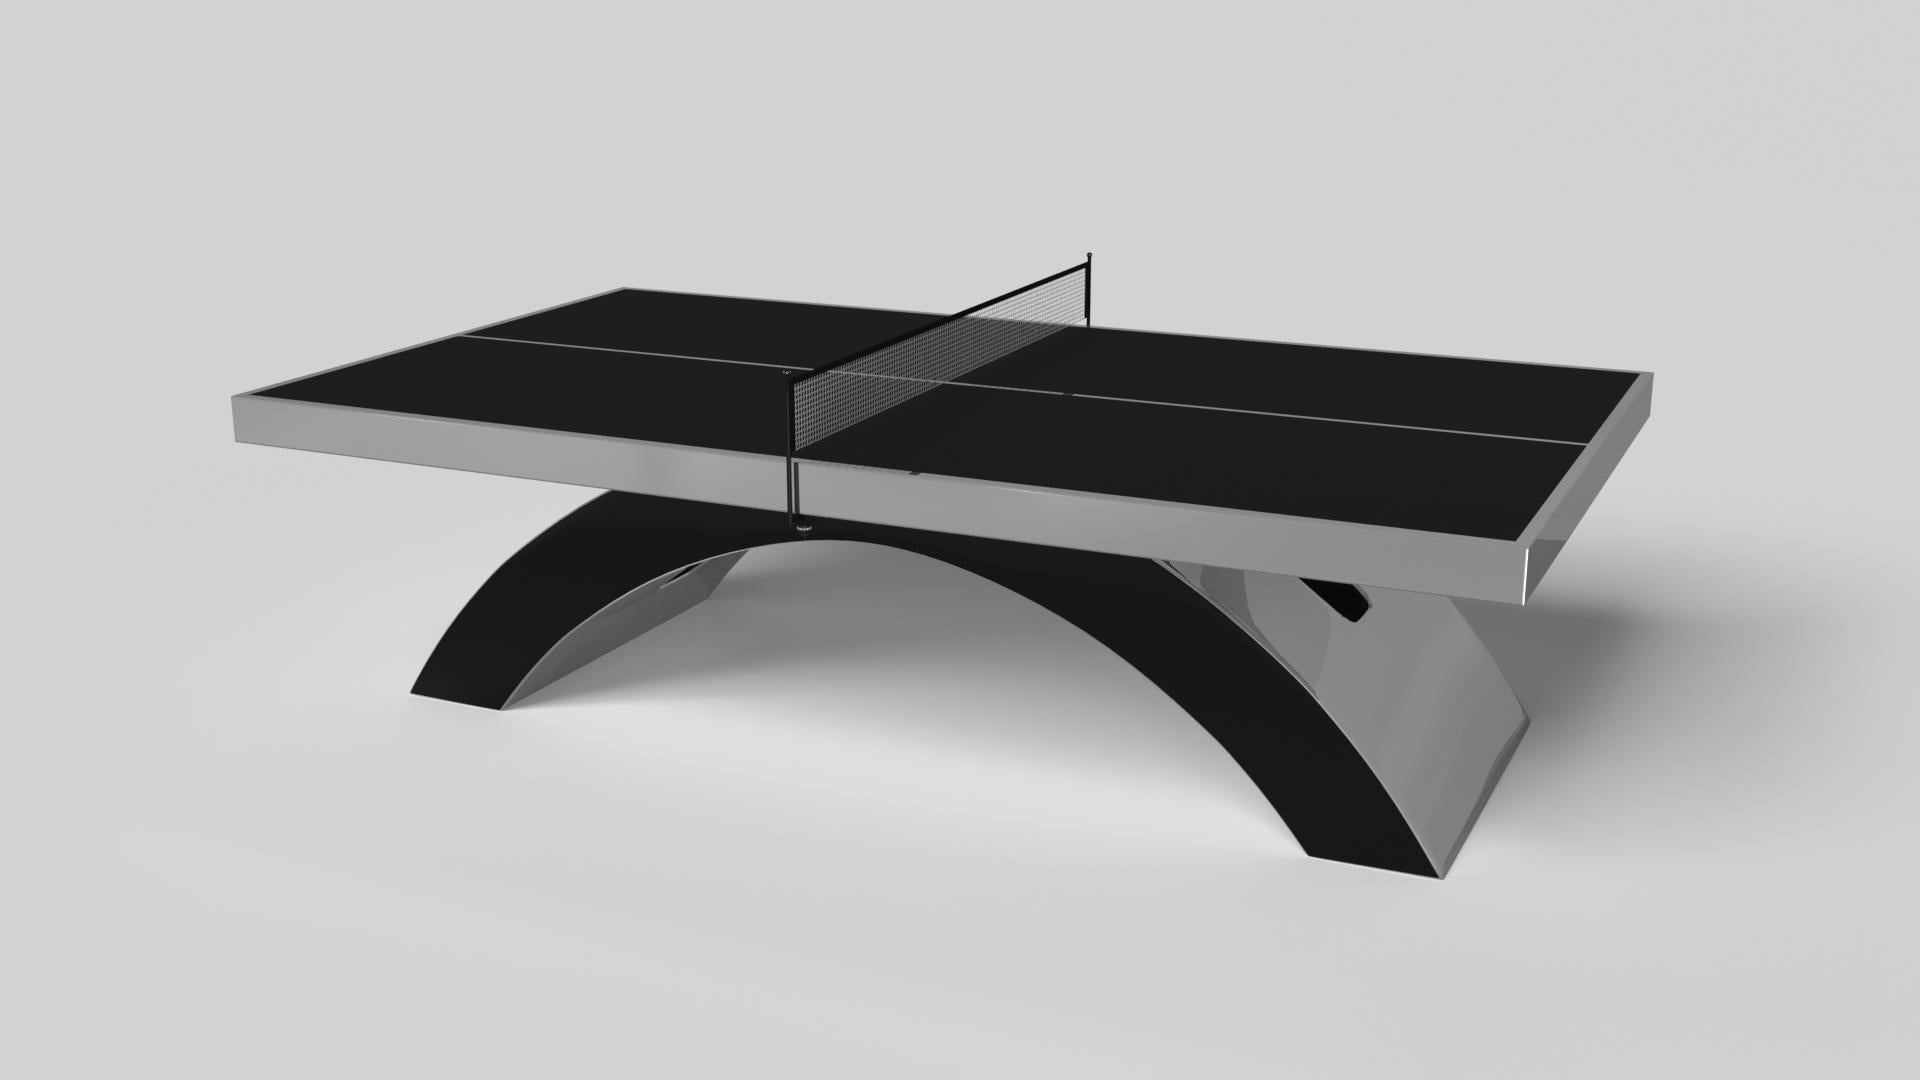 An open, arched base balances beautifully against the hard edges of the rectangular surface top, making the Zenith table tennis table in black with red a striking juxtaposition of modern, geometric forms. Minimalist in its appeal yet luxurious in